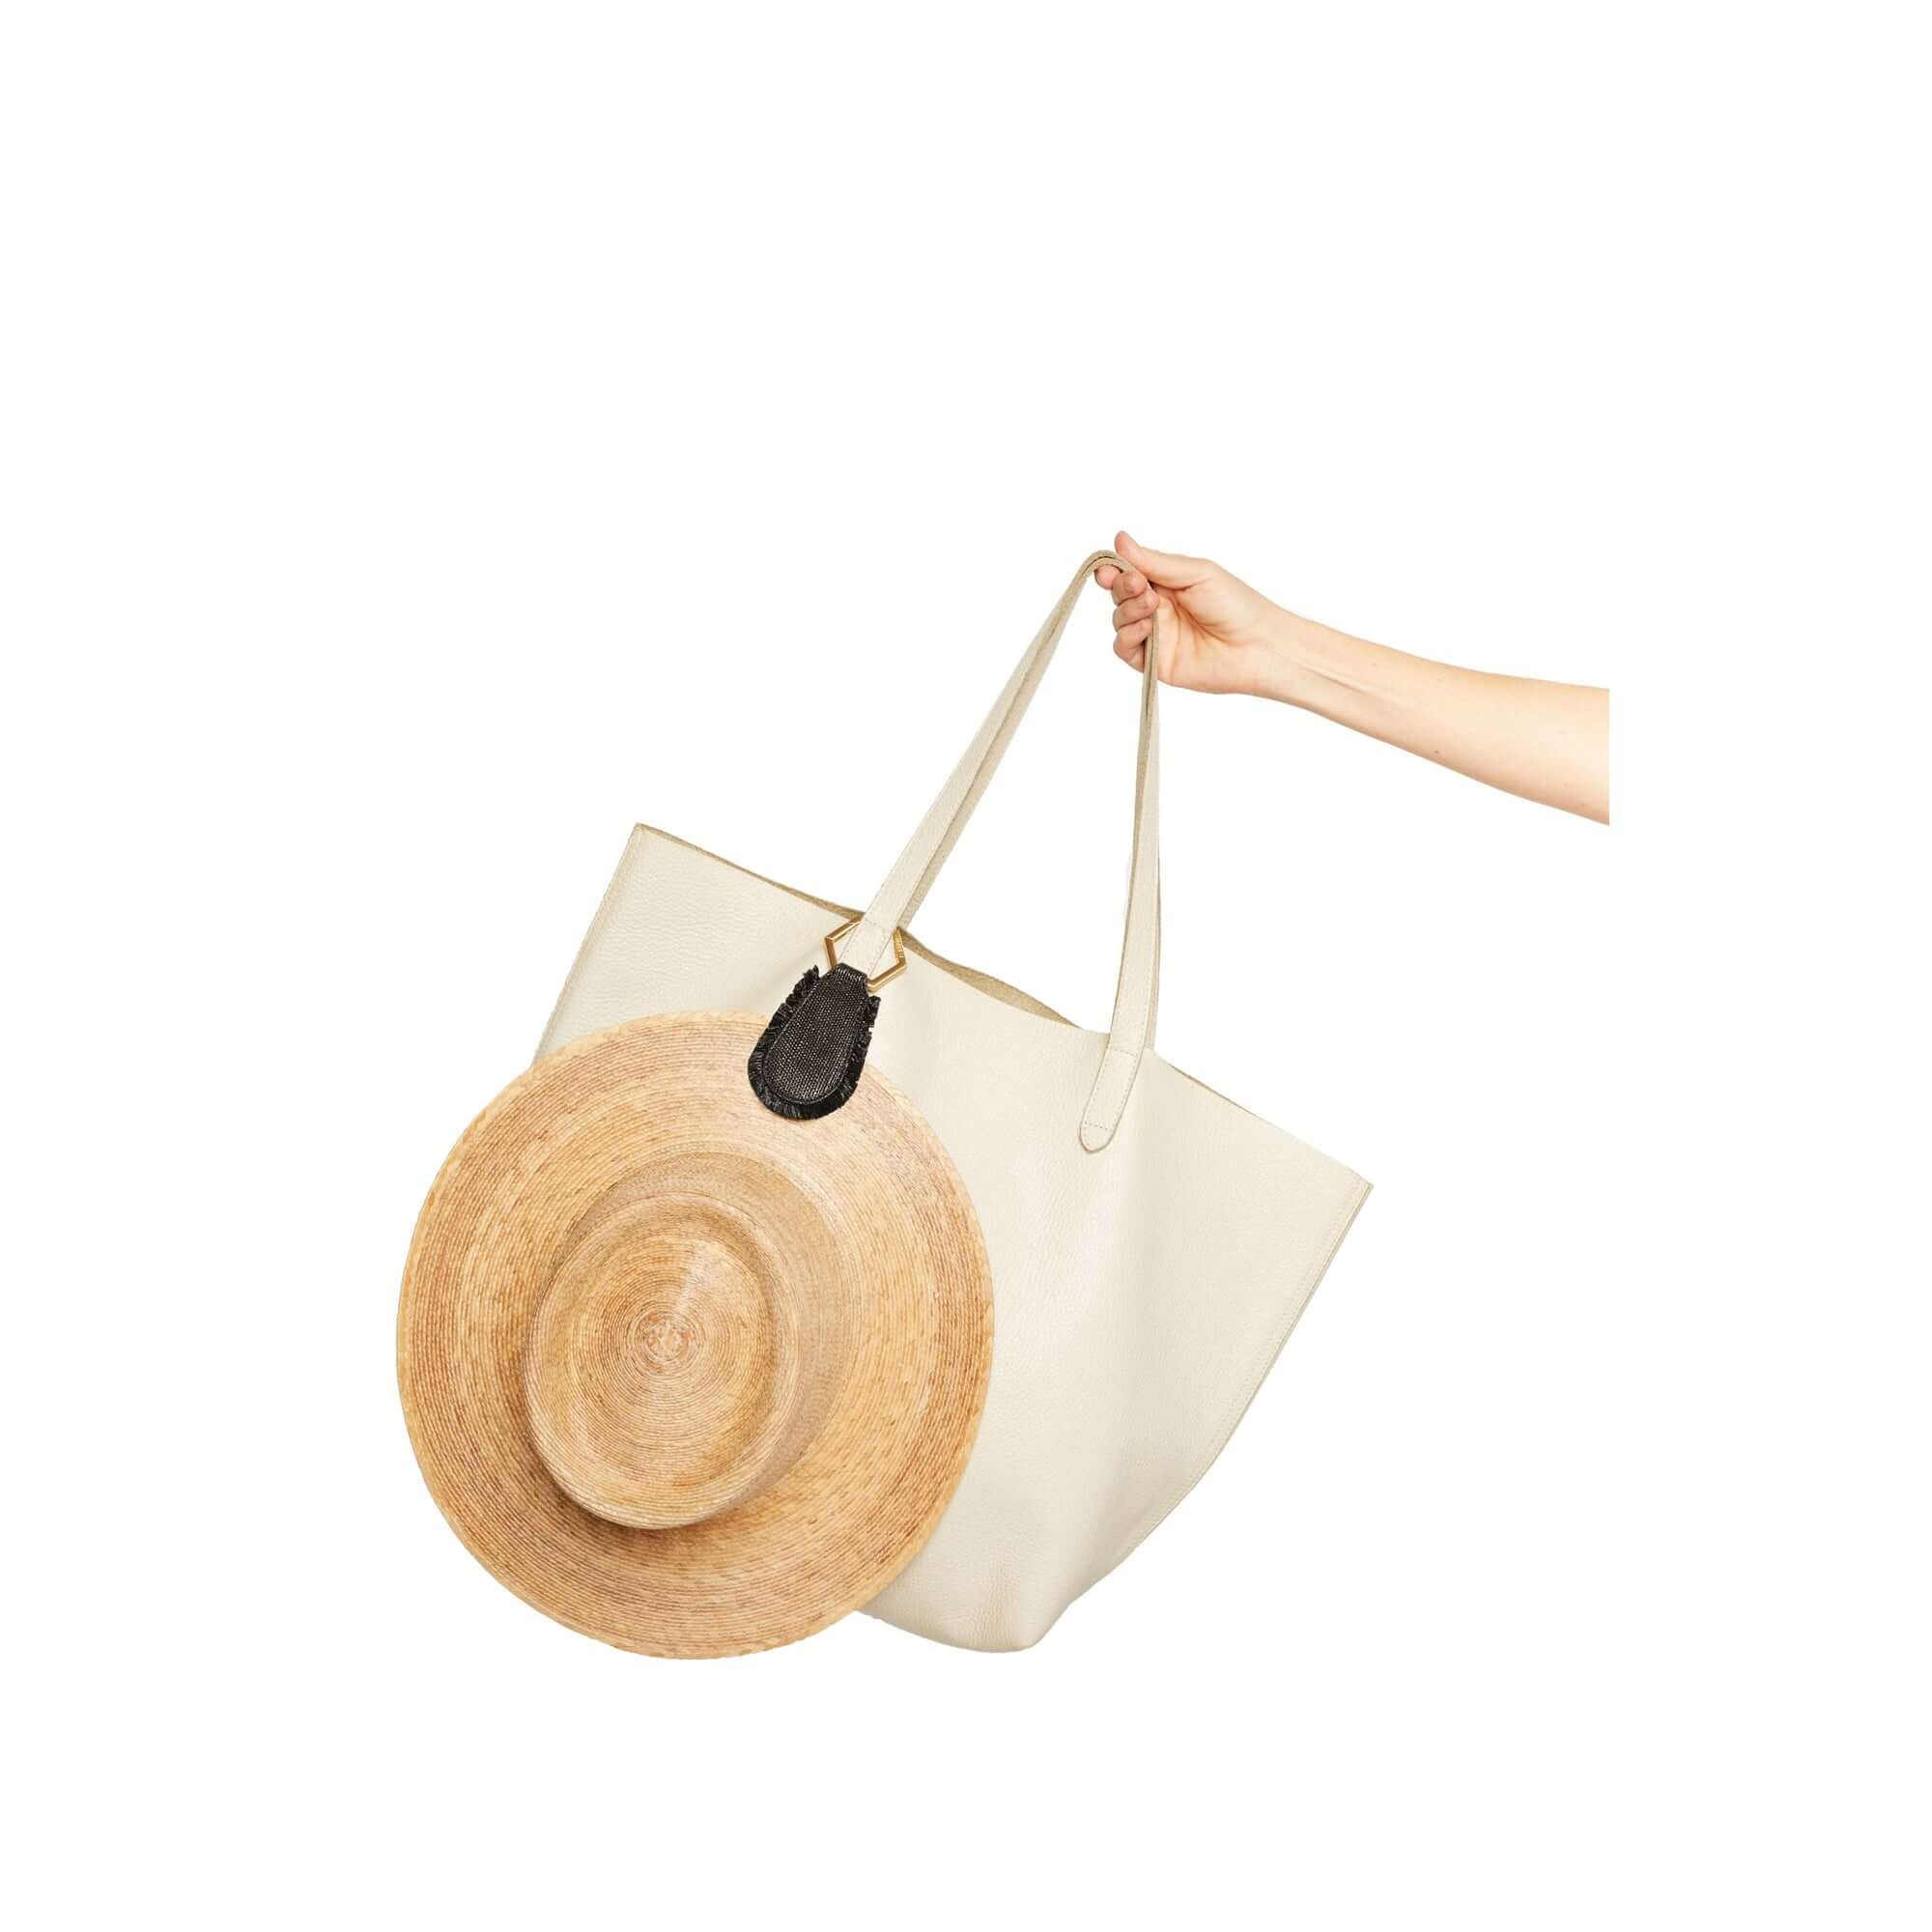  The fray raffia TOPTOTE magnetic hat clip attaches to your bag and allows you to travel with your hat hands free.